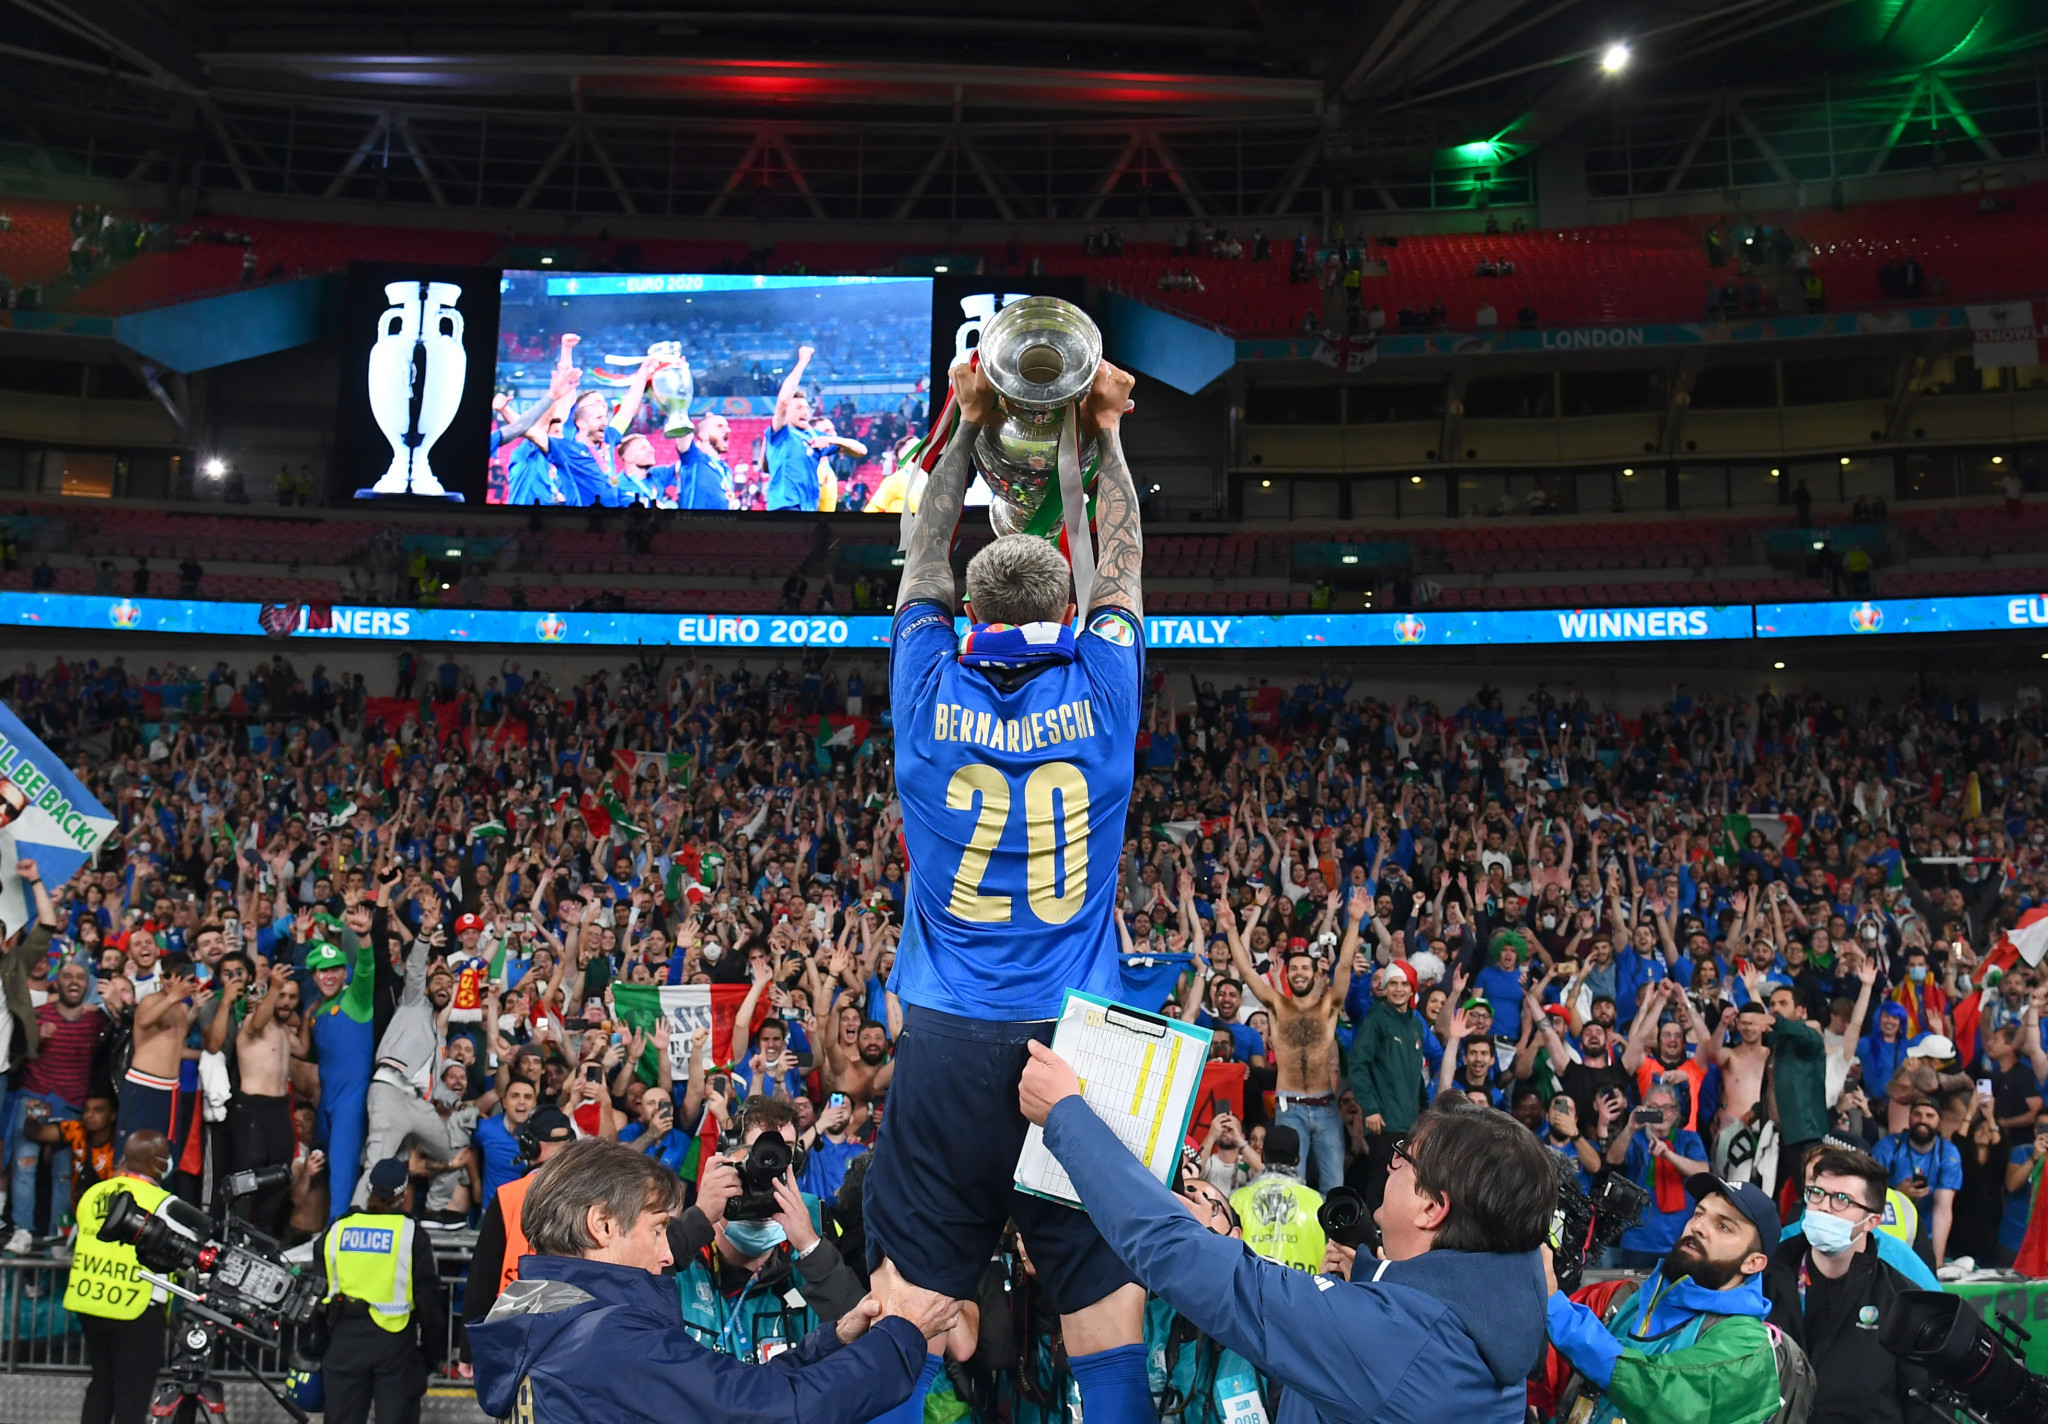 Italy elected as co-hosts in 2032 with Turkey lifted the European Championships trophy in 2021 when the final was held at Wembley ©Getty Images